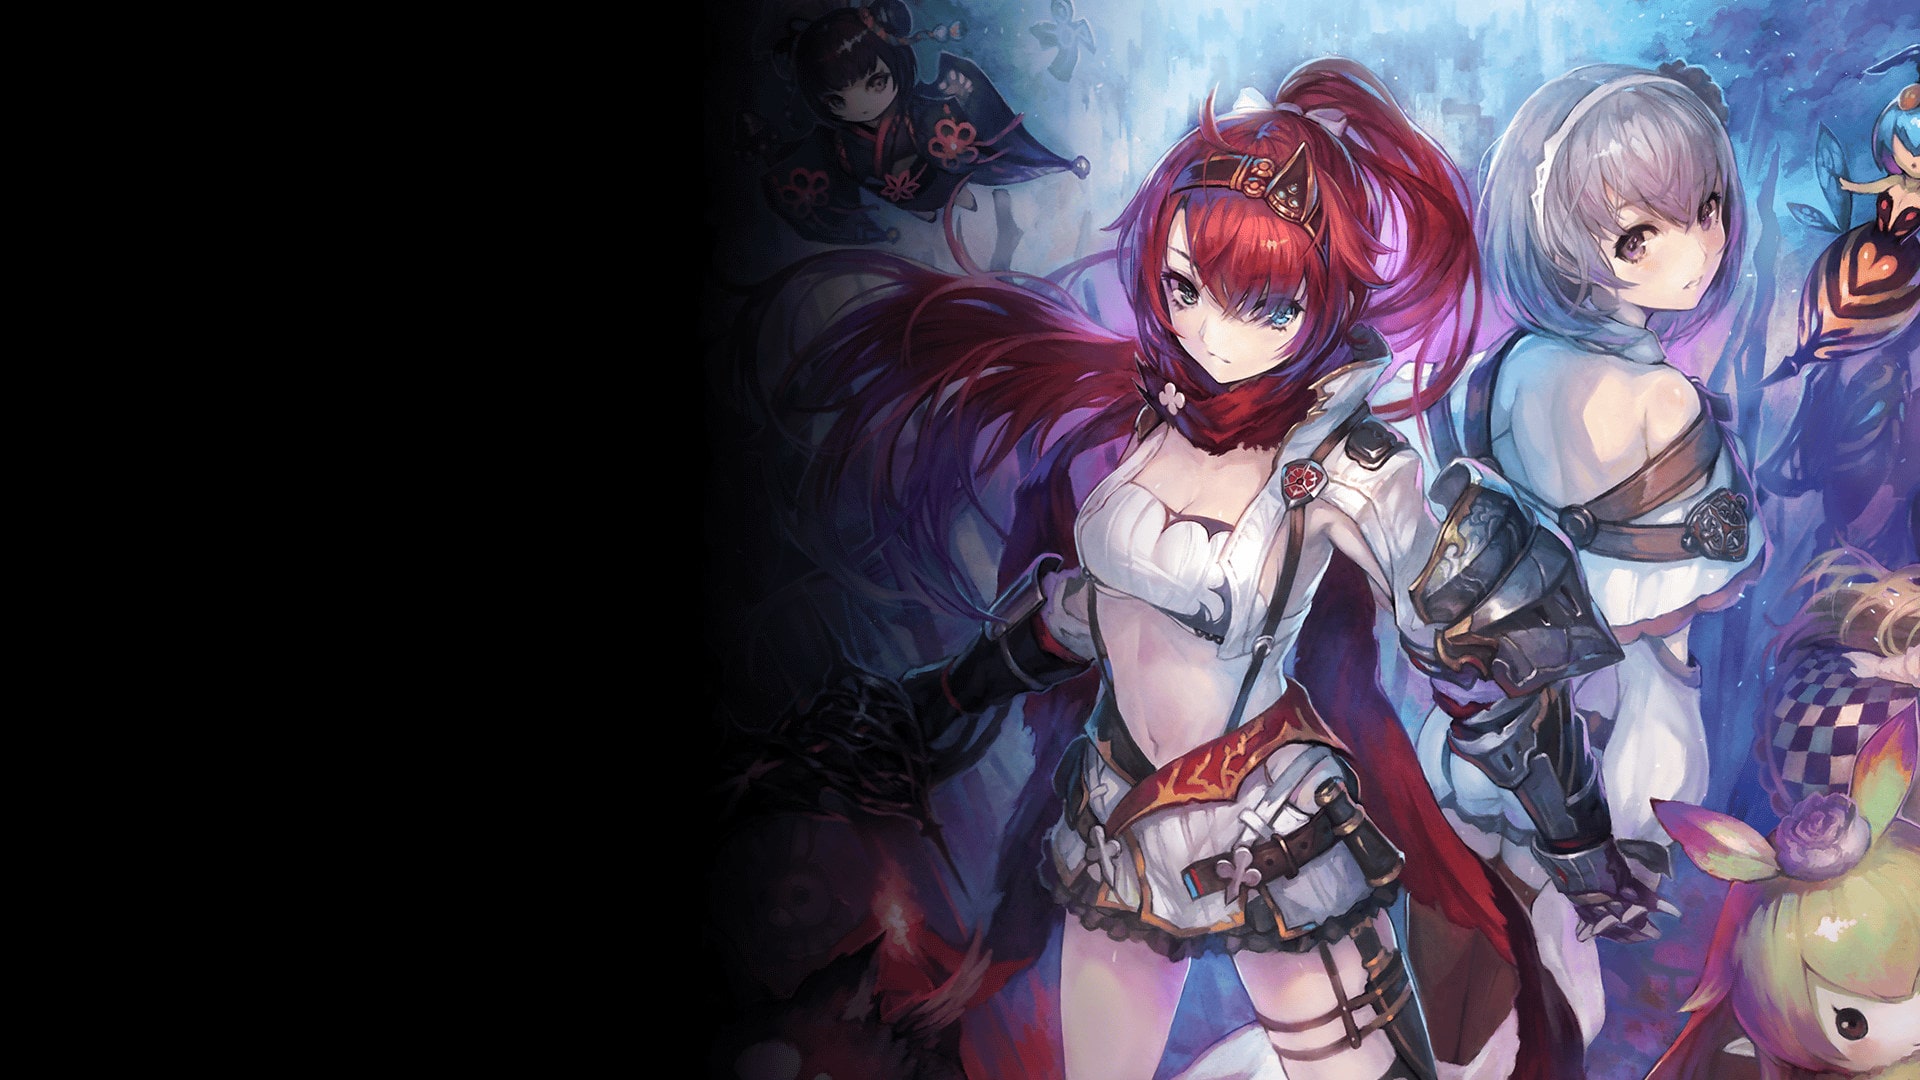 Nights of Azure 2: Bride of the New Moon (English Ver.)